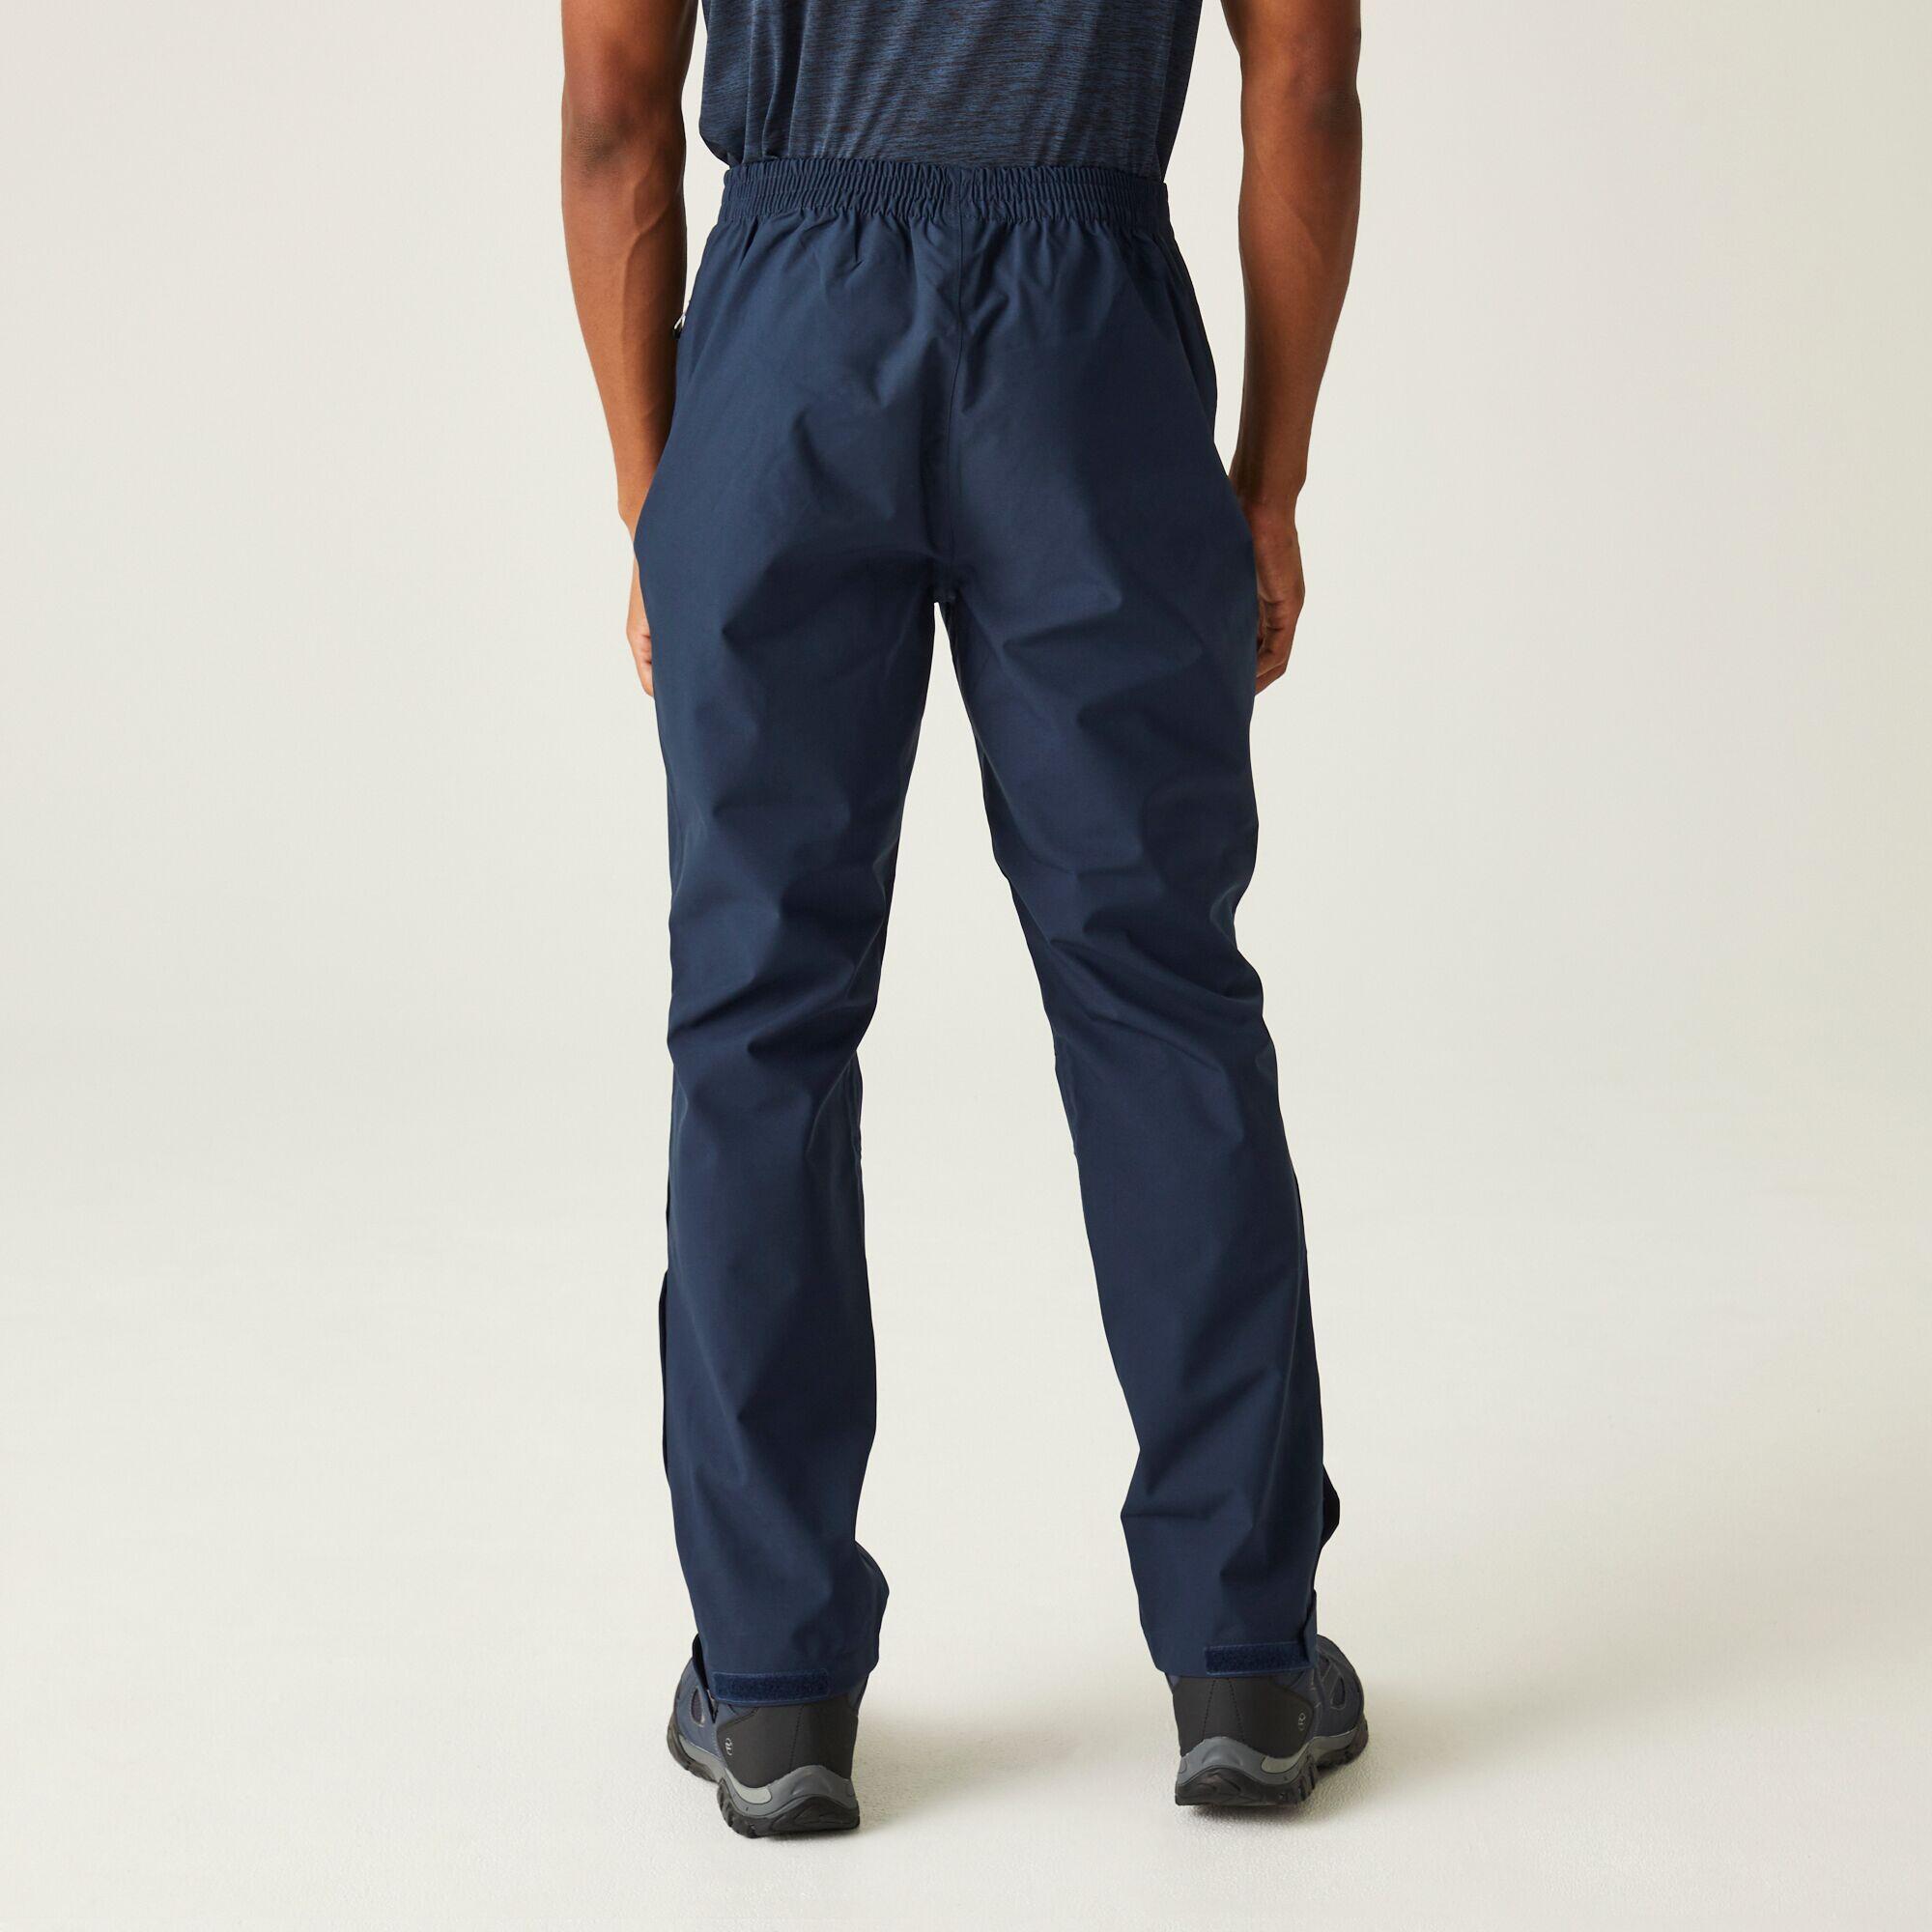 Highton Stretch Men's Hiking Overtrousers - Navy 2/5